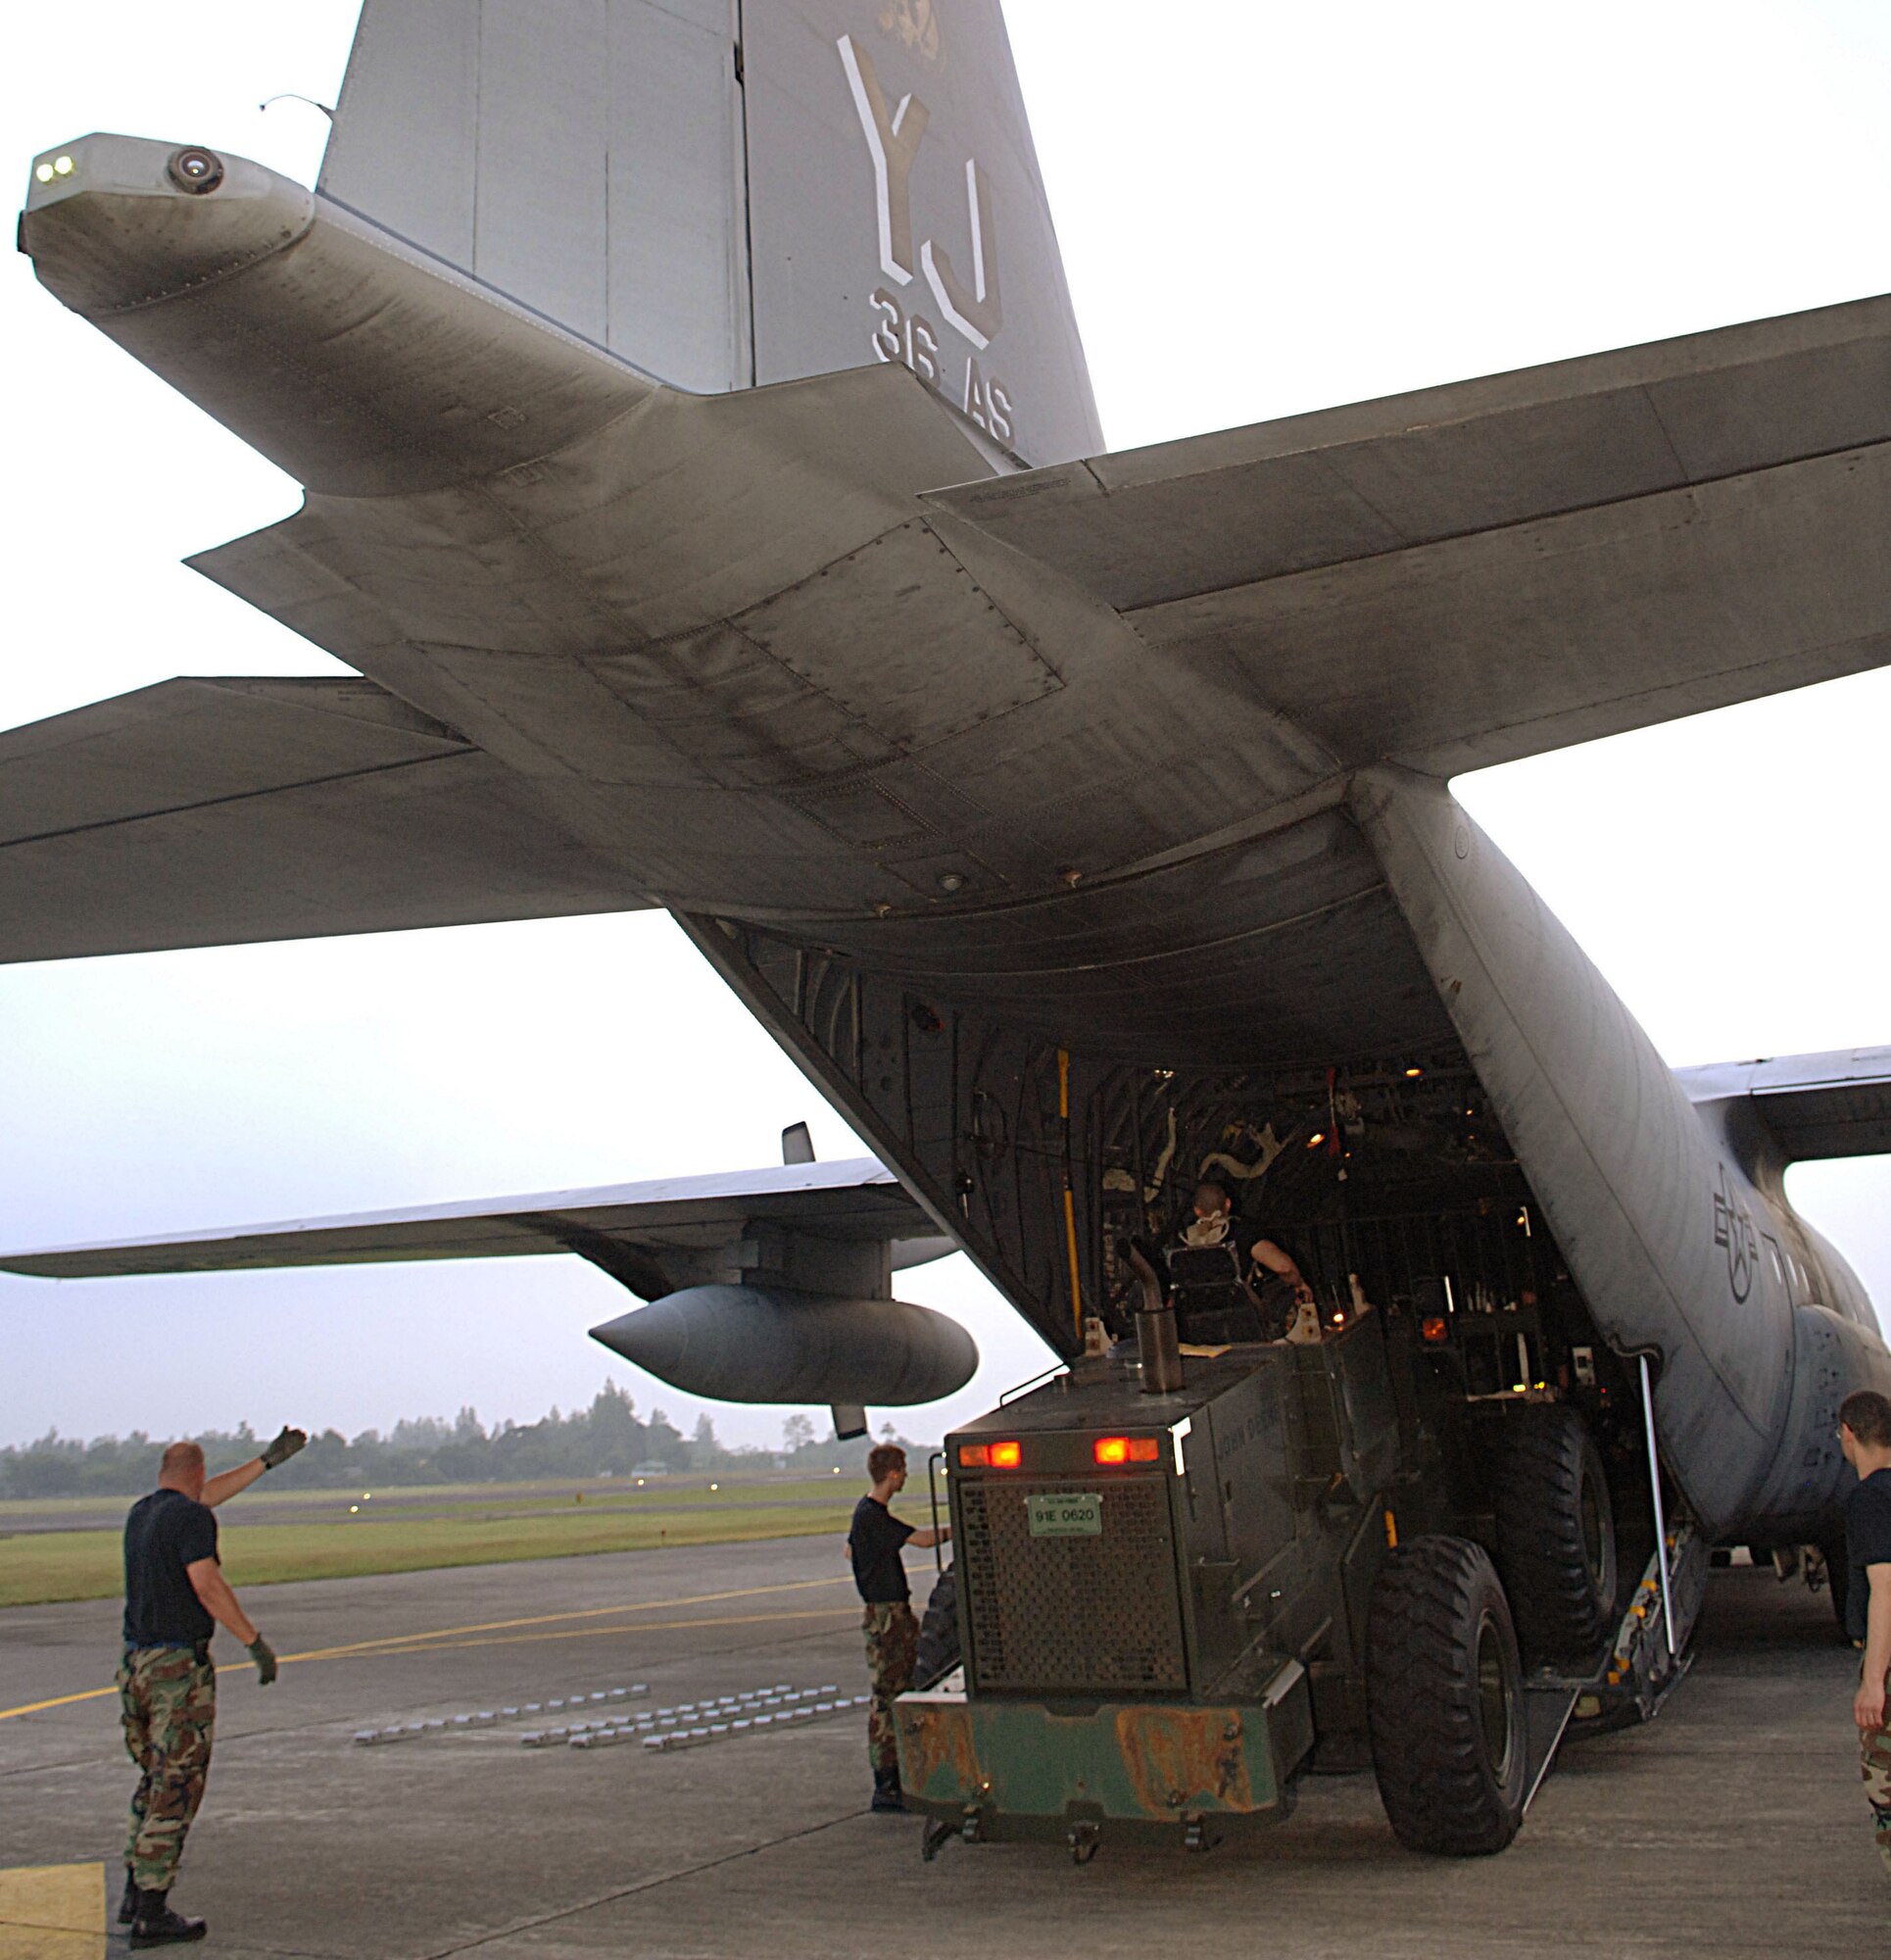 Airmen from the 36th Airlift Squadron and Combat Mobility Element at Yokota Air Base, Japan, unload supplies and equipment at Yogyakarta, Indonesia, on Thursday, June 1, 2006. The C-130 Hercules mission brought humanitarian relief aid to Indonesia, after an earthquake claimed the lives of more than 6,200 people and injured thousands more. (U.S. Air Force photo/Airman 1st Class Javier Cruz Jr.)